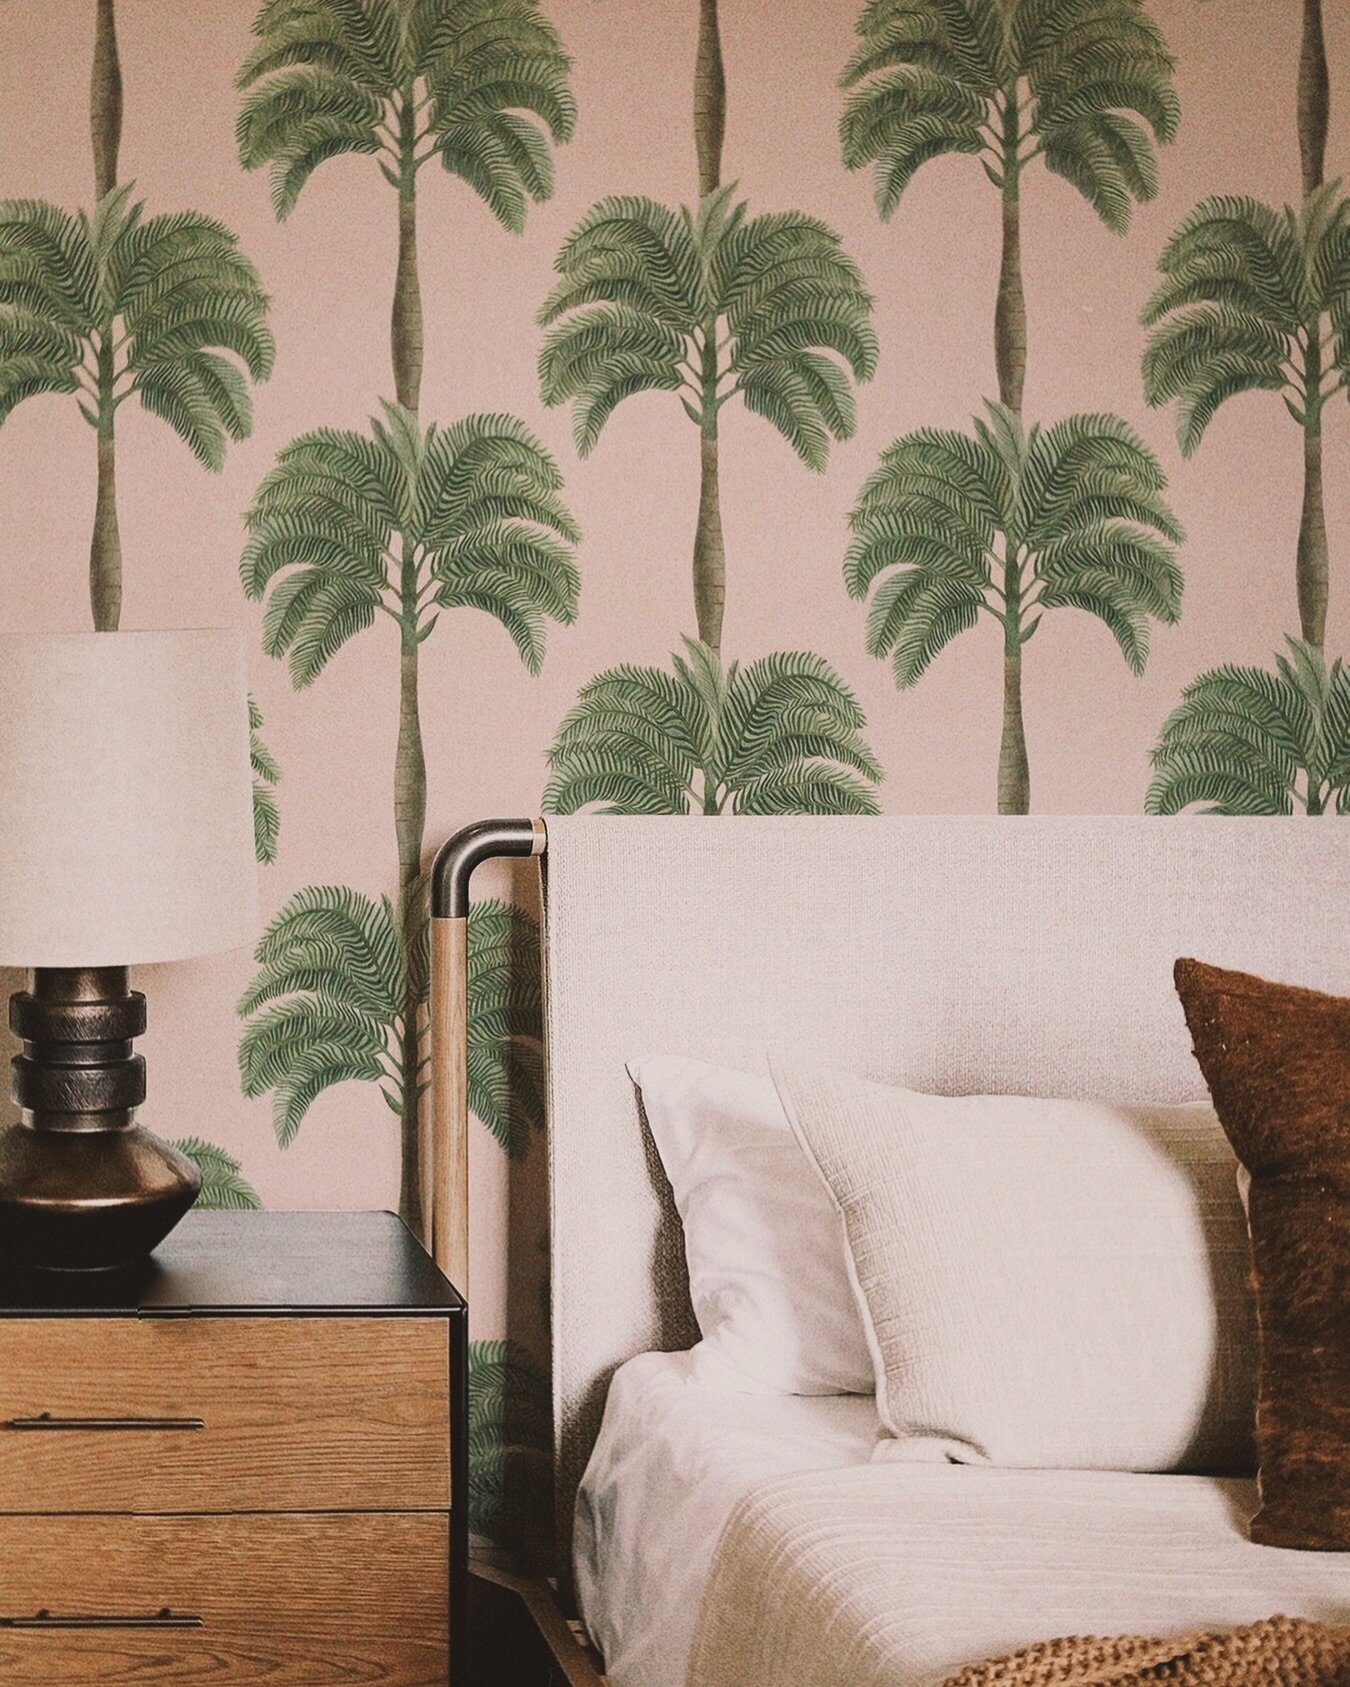 Palma in Flamingo wallpaper made of Large scale palm trees @deus.ex.gardenia.official 🌴 
⠀⠀⠀⠀⠀⠀⠀⠀⠀
⠀⠀⠀⠀⠀⠀⠀⠀⠀
⠀⠀⠀⠀⠀⠀⠀⠀⠀
⠀⠀⠀⠀⠀⠀⠀⠀⠀
⠀⠀⠀⠀⠀⠀⠀⠀⠀
⠀⠀⠀⠀⠀⠀⠀⠀⠀
 #creativity #art #creative #artist #artwork #inspiration #drawing #painting #artistsoninstagram #il